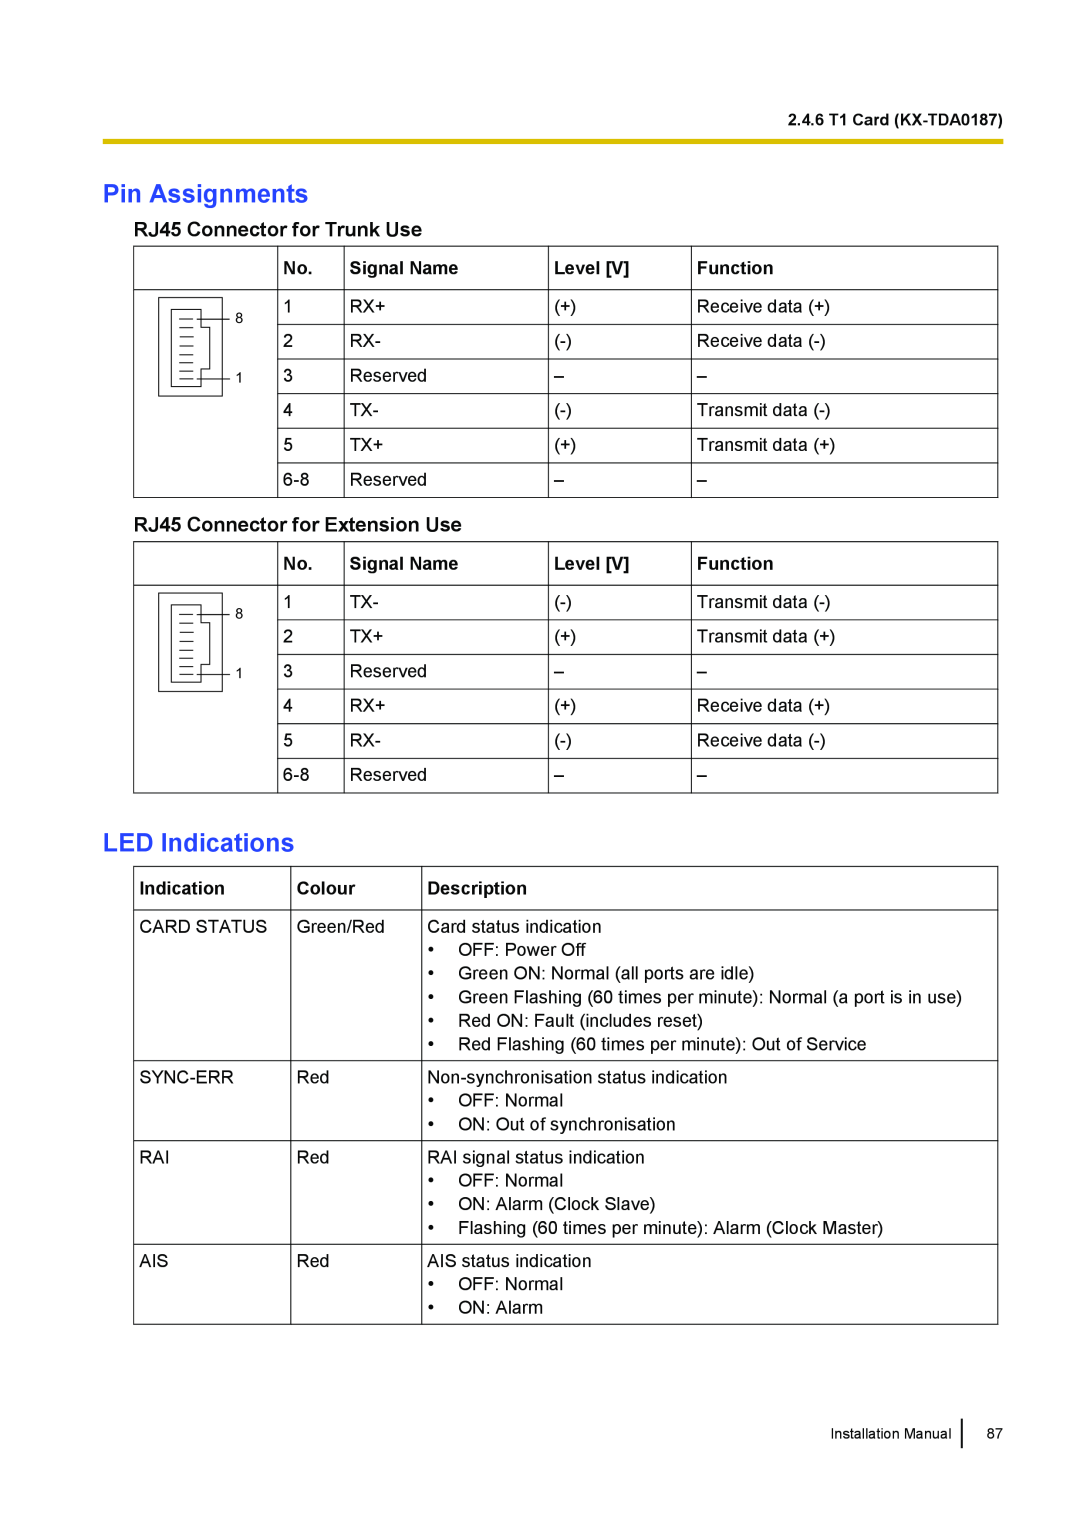 Panasonic KX-TDA100 Pin Assignments, LED Indications, RJ45 Connector for Trunk Use, RJ45 Connector for Extension Use 